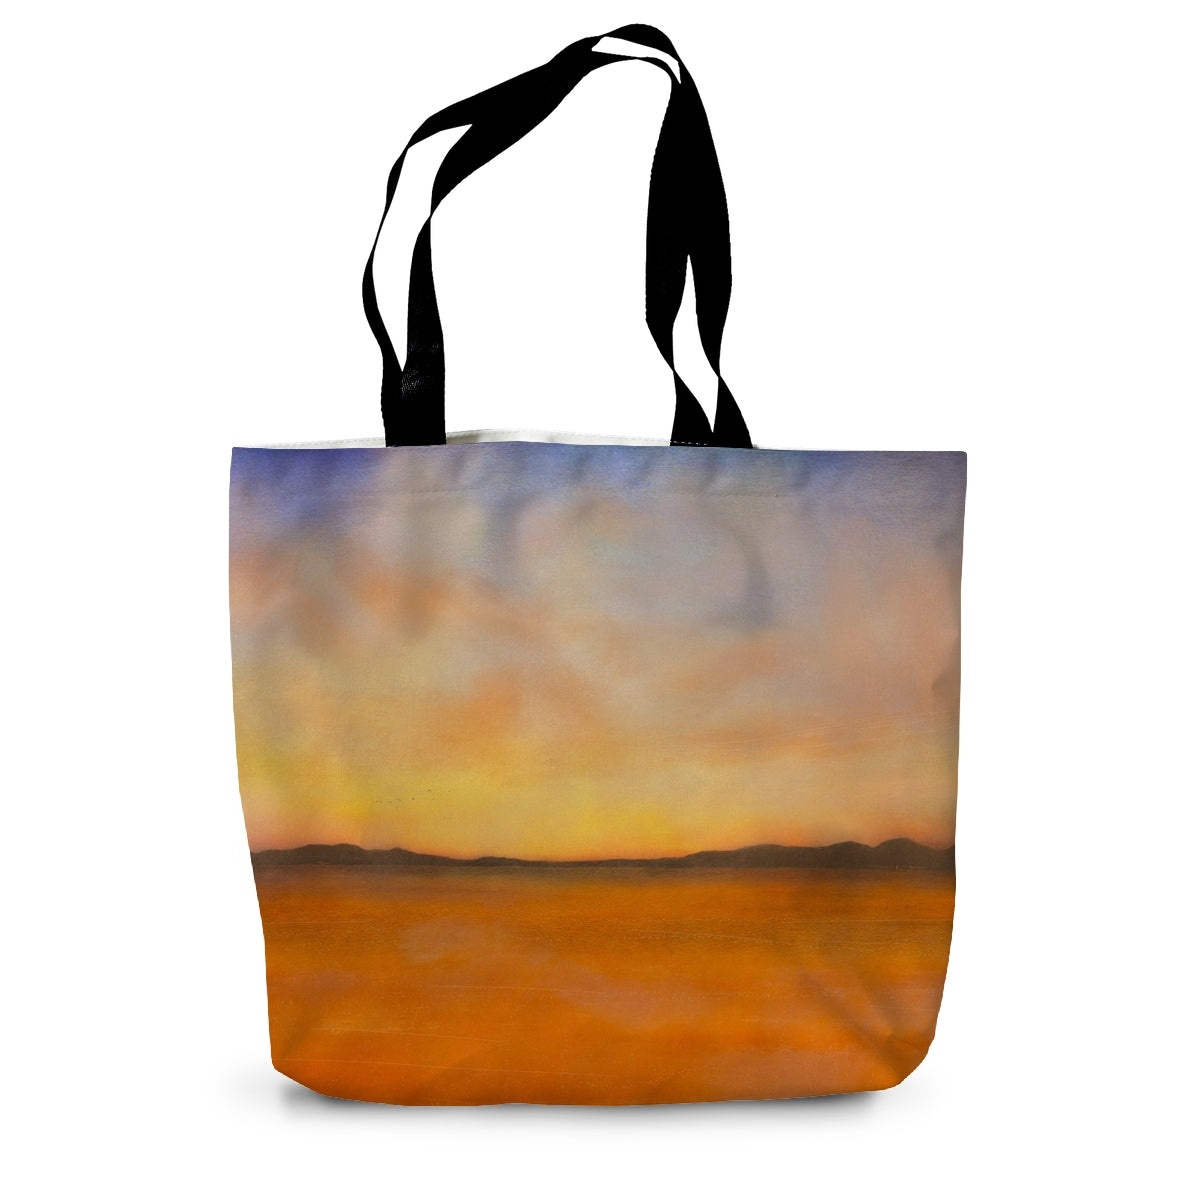 Islay Dawn Art Gifts Canvas Tote Bag-Bags-Hebridean Islands Art Gallery-14"x18.5"-Paintings, Prints, Homeware, Art Gifts From Scotland By Scottish Artist Kevin Hunter